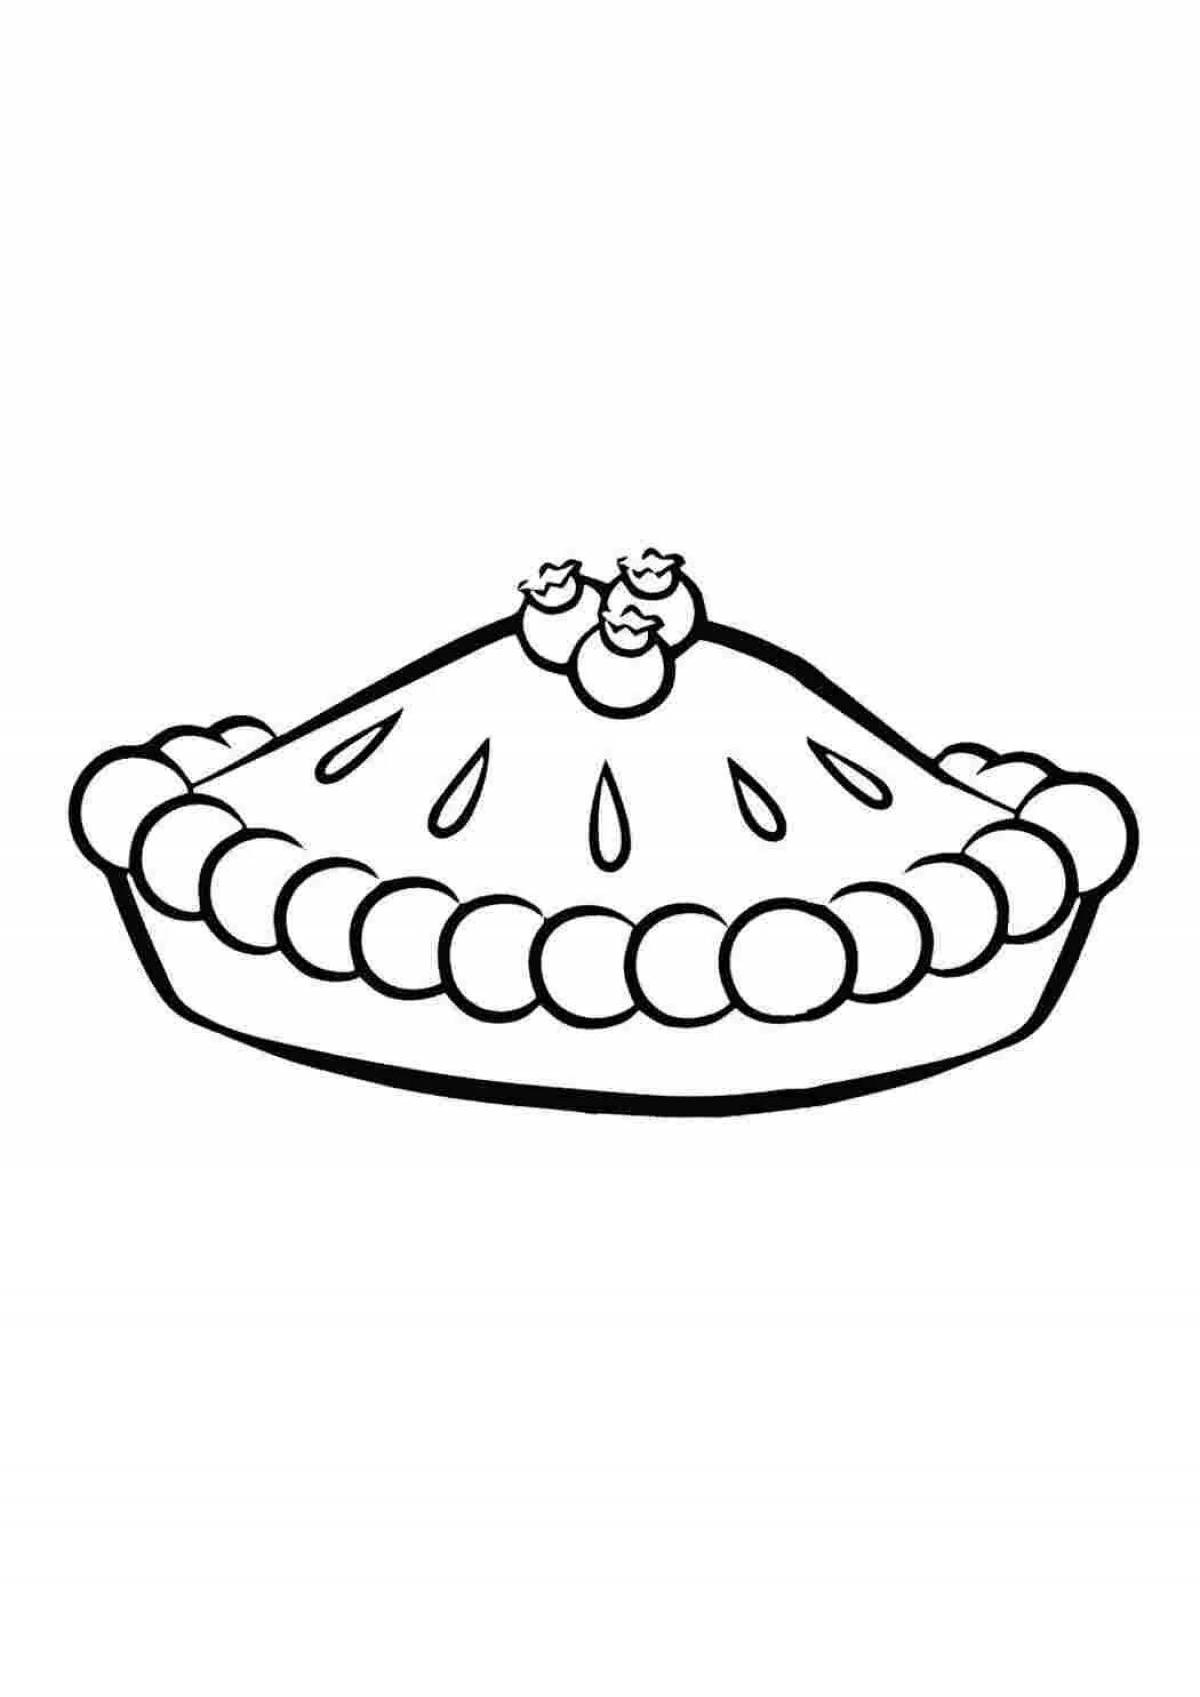 Animated loaf coloring page for toddlers